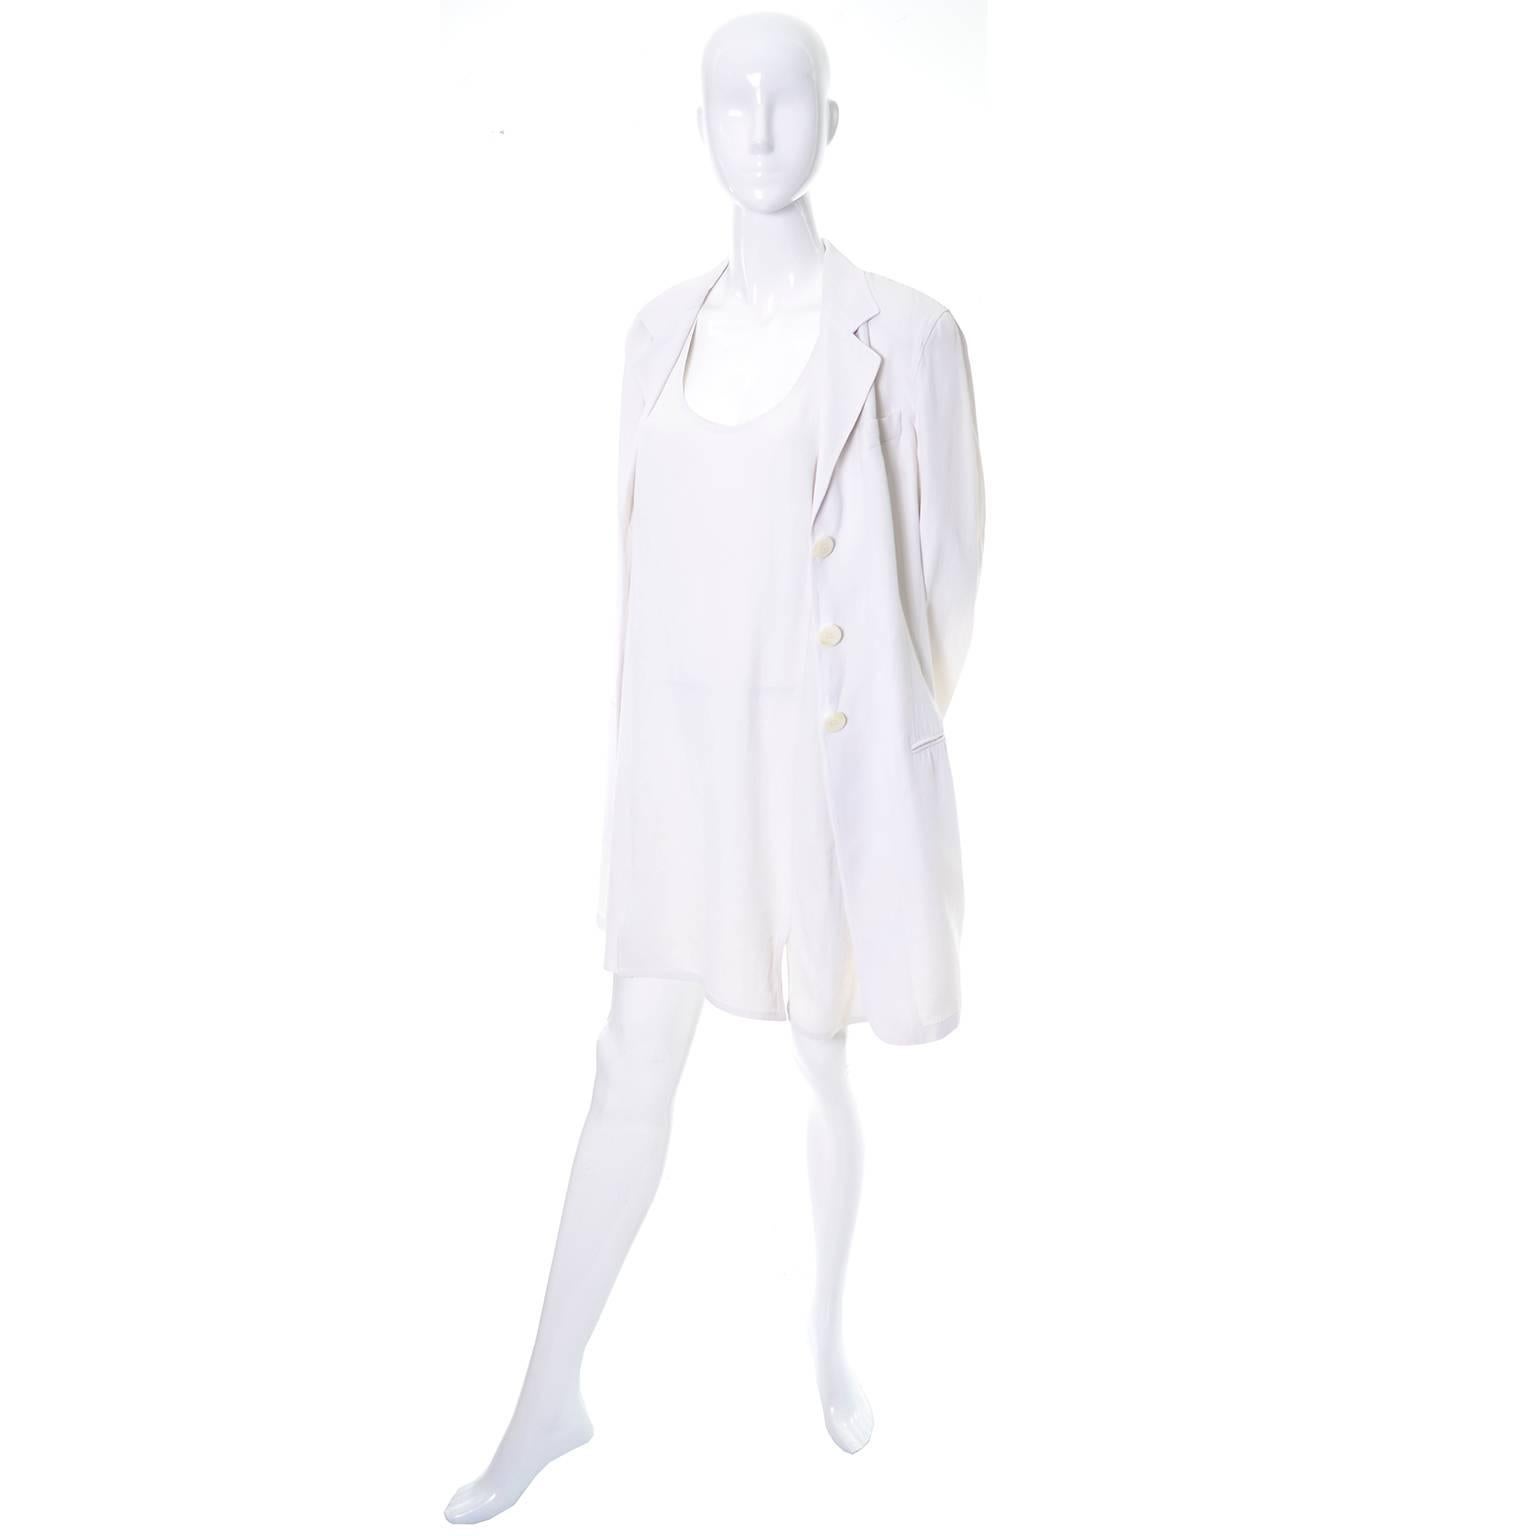 This pretty 2 piece vintage outfit was designed by Donna Karan and made in Italy in the 1990's.  This includes a racer back shift dress with a small slit and a long single breasted coat with front pockets.  The fabric is an ivory/white acetate linen